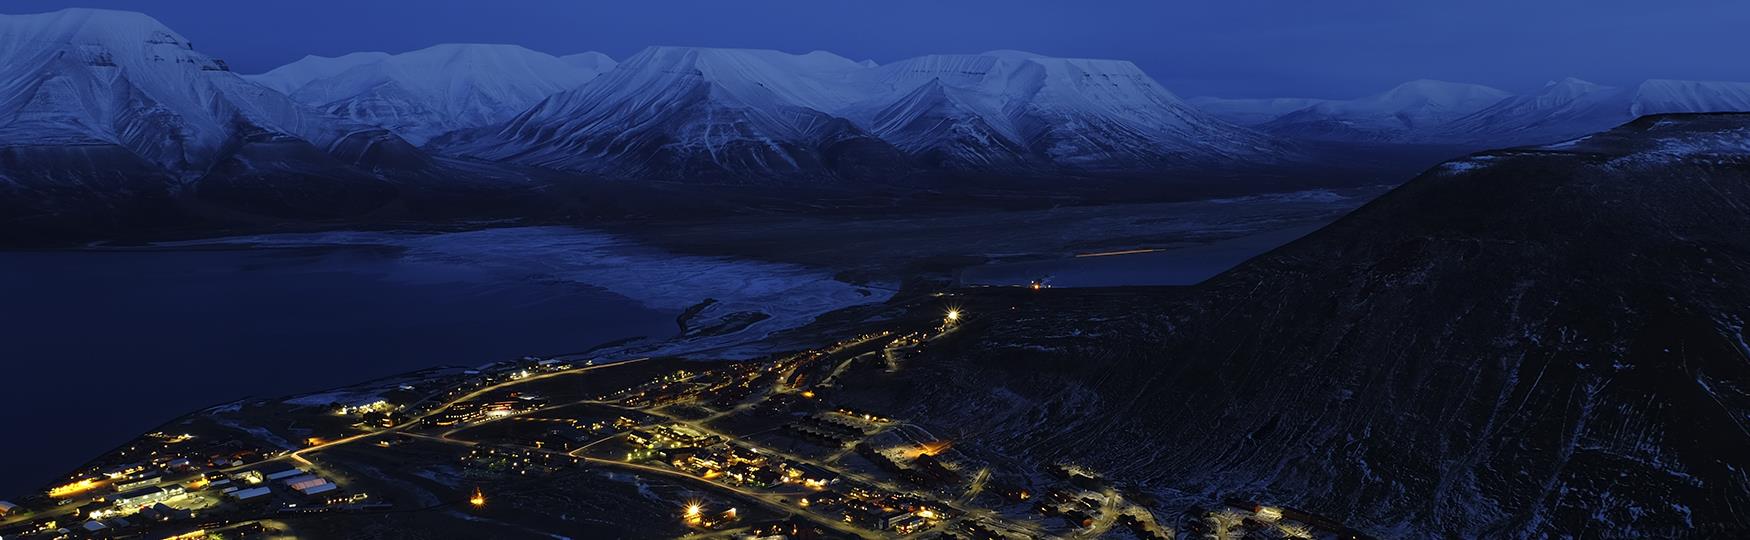 Longyearbyen seen from above in blue light with mountains in the background